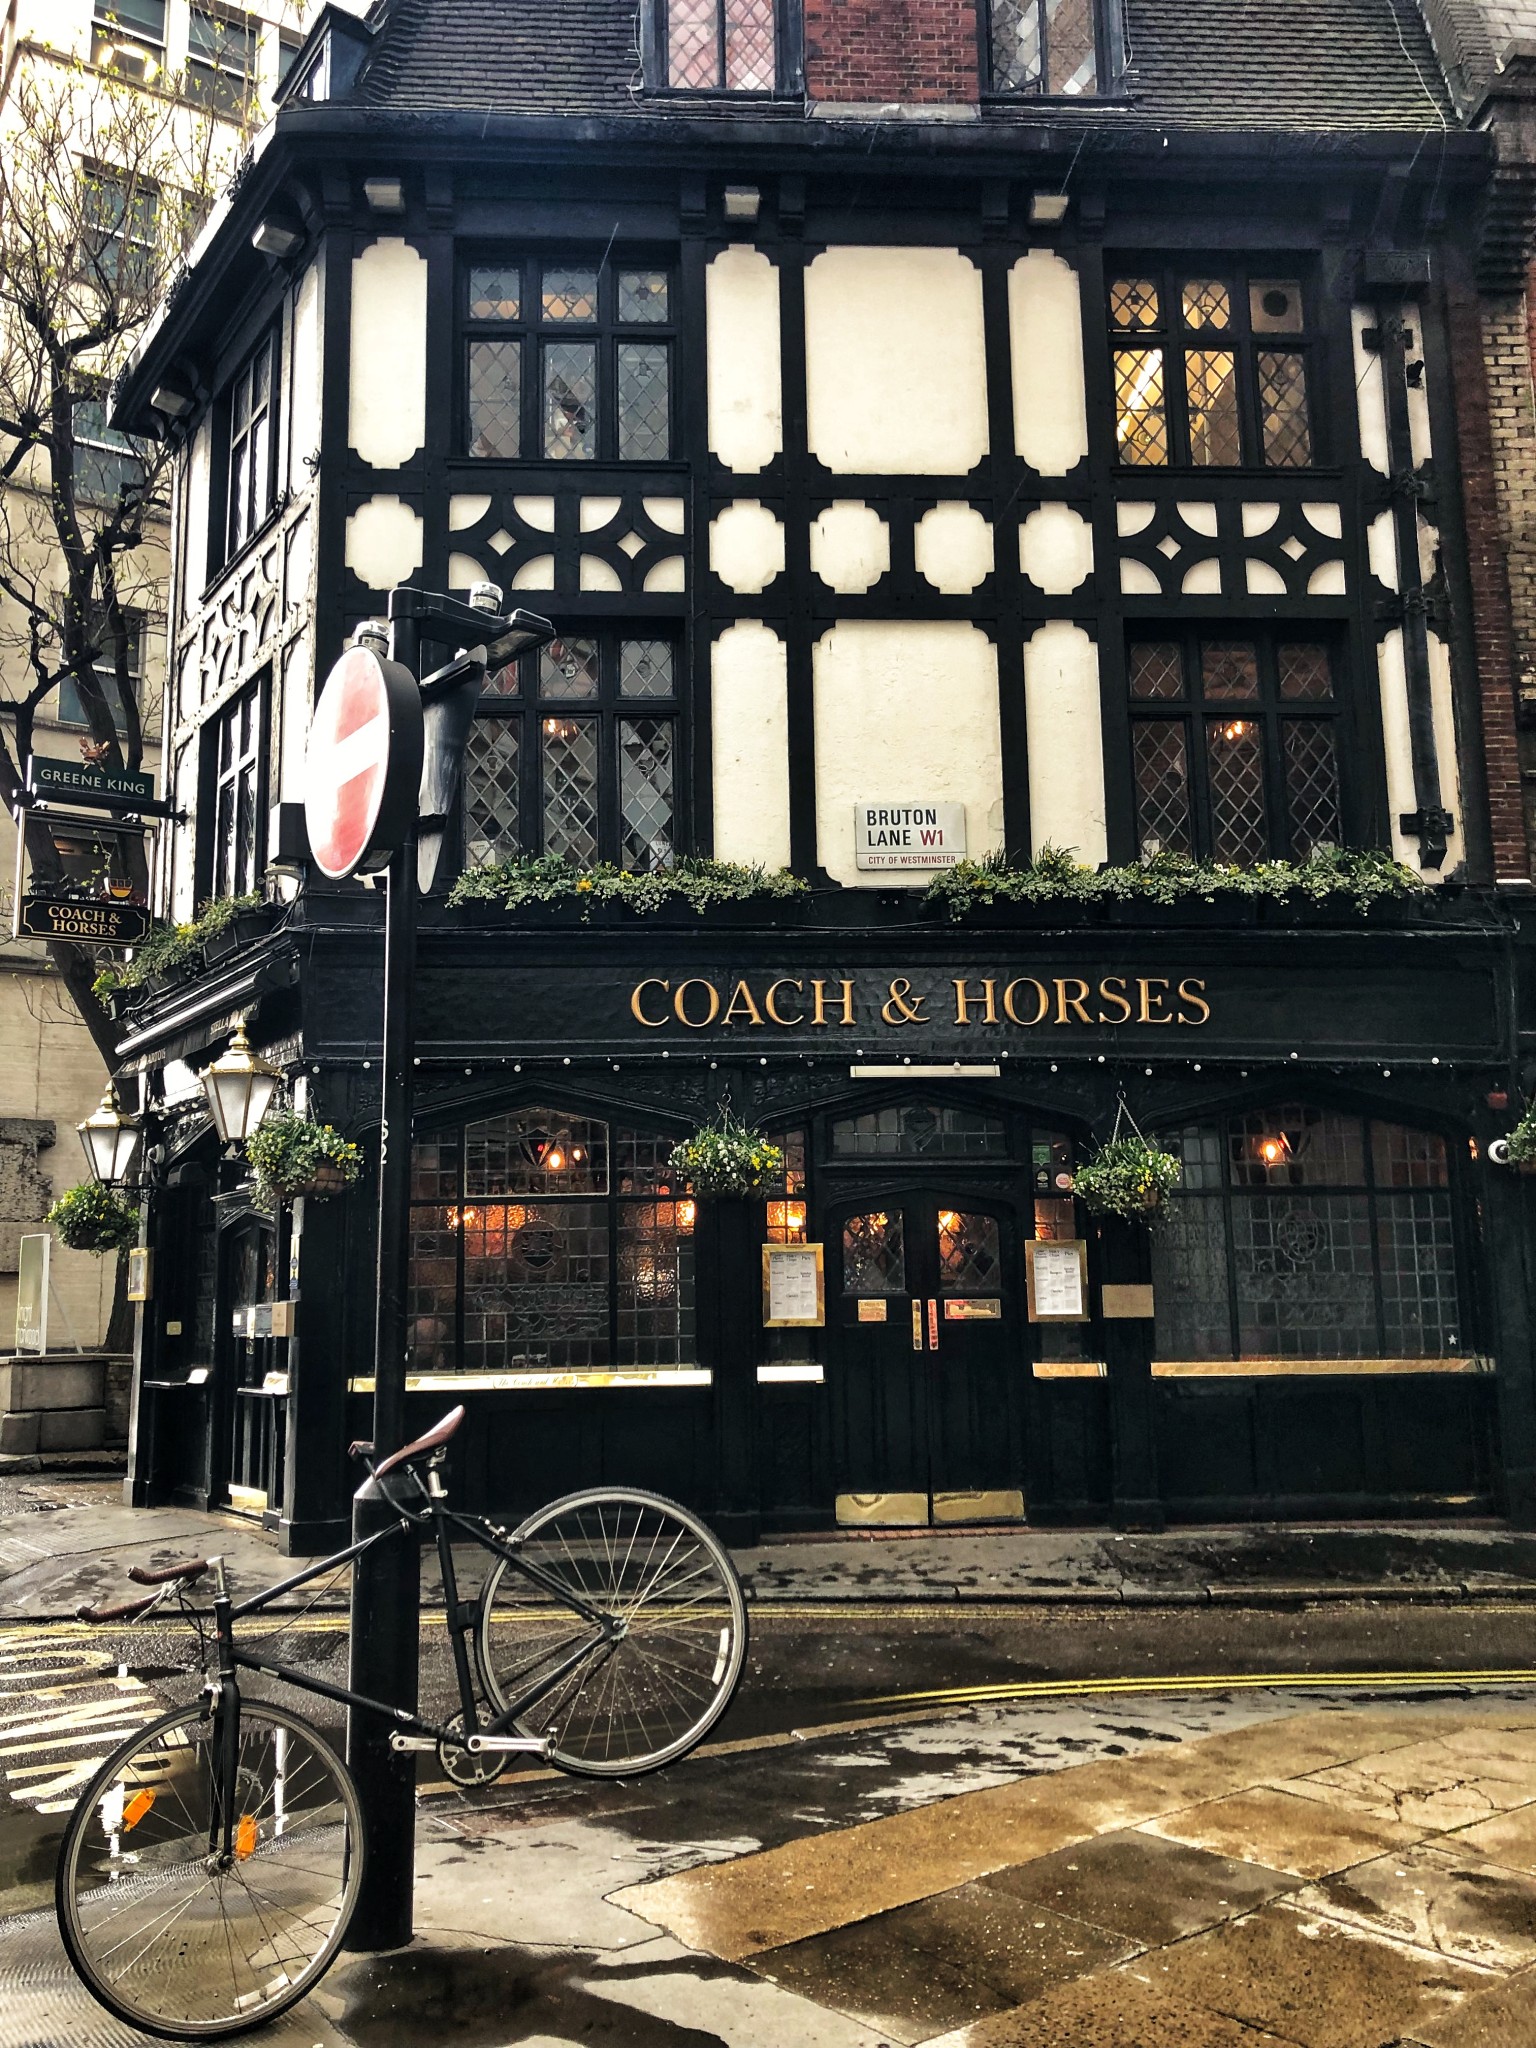 coach and horses pub, most instagrammable places in london, the-alyst.com